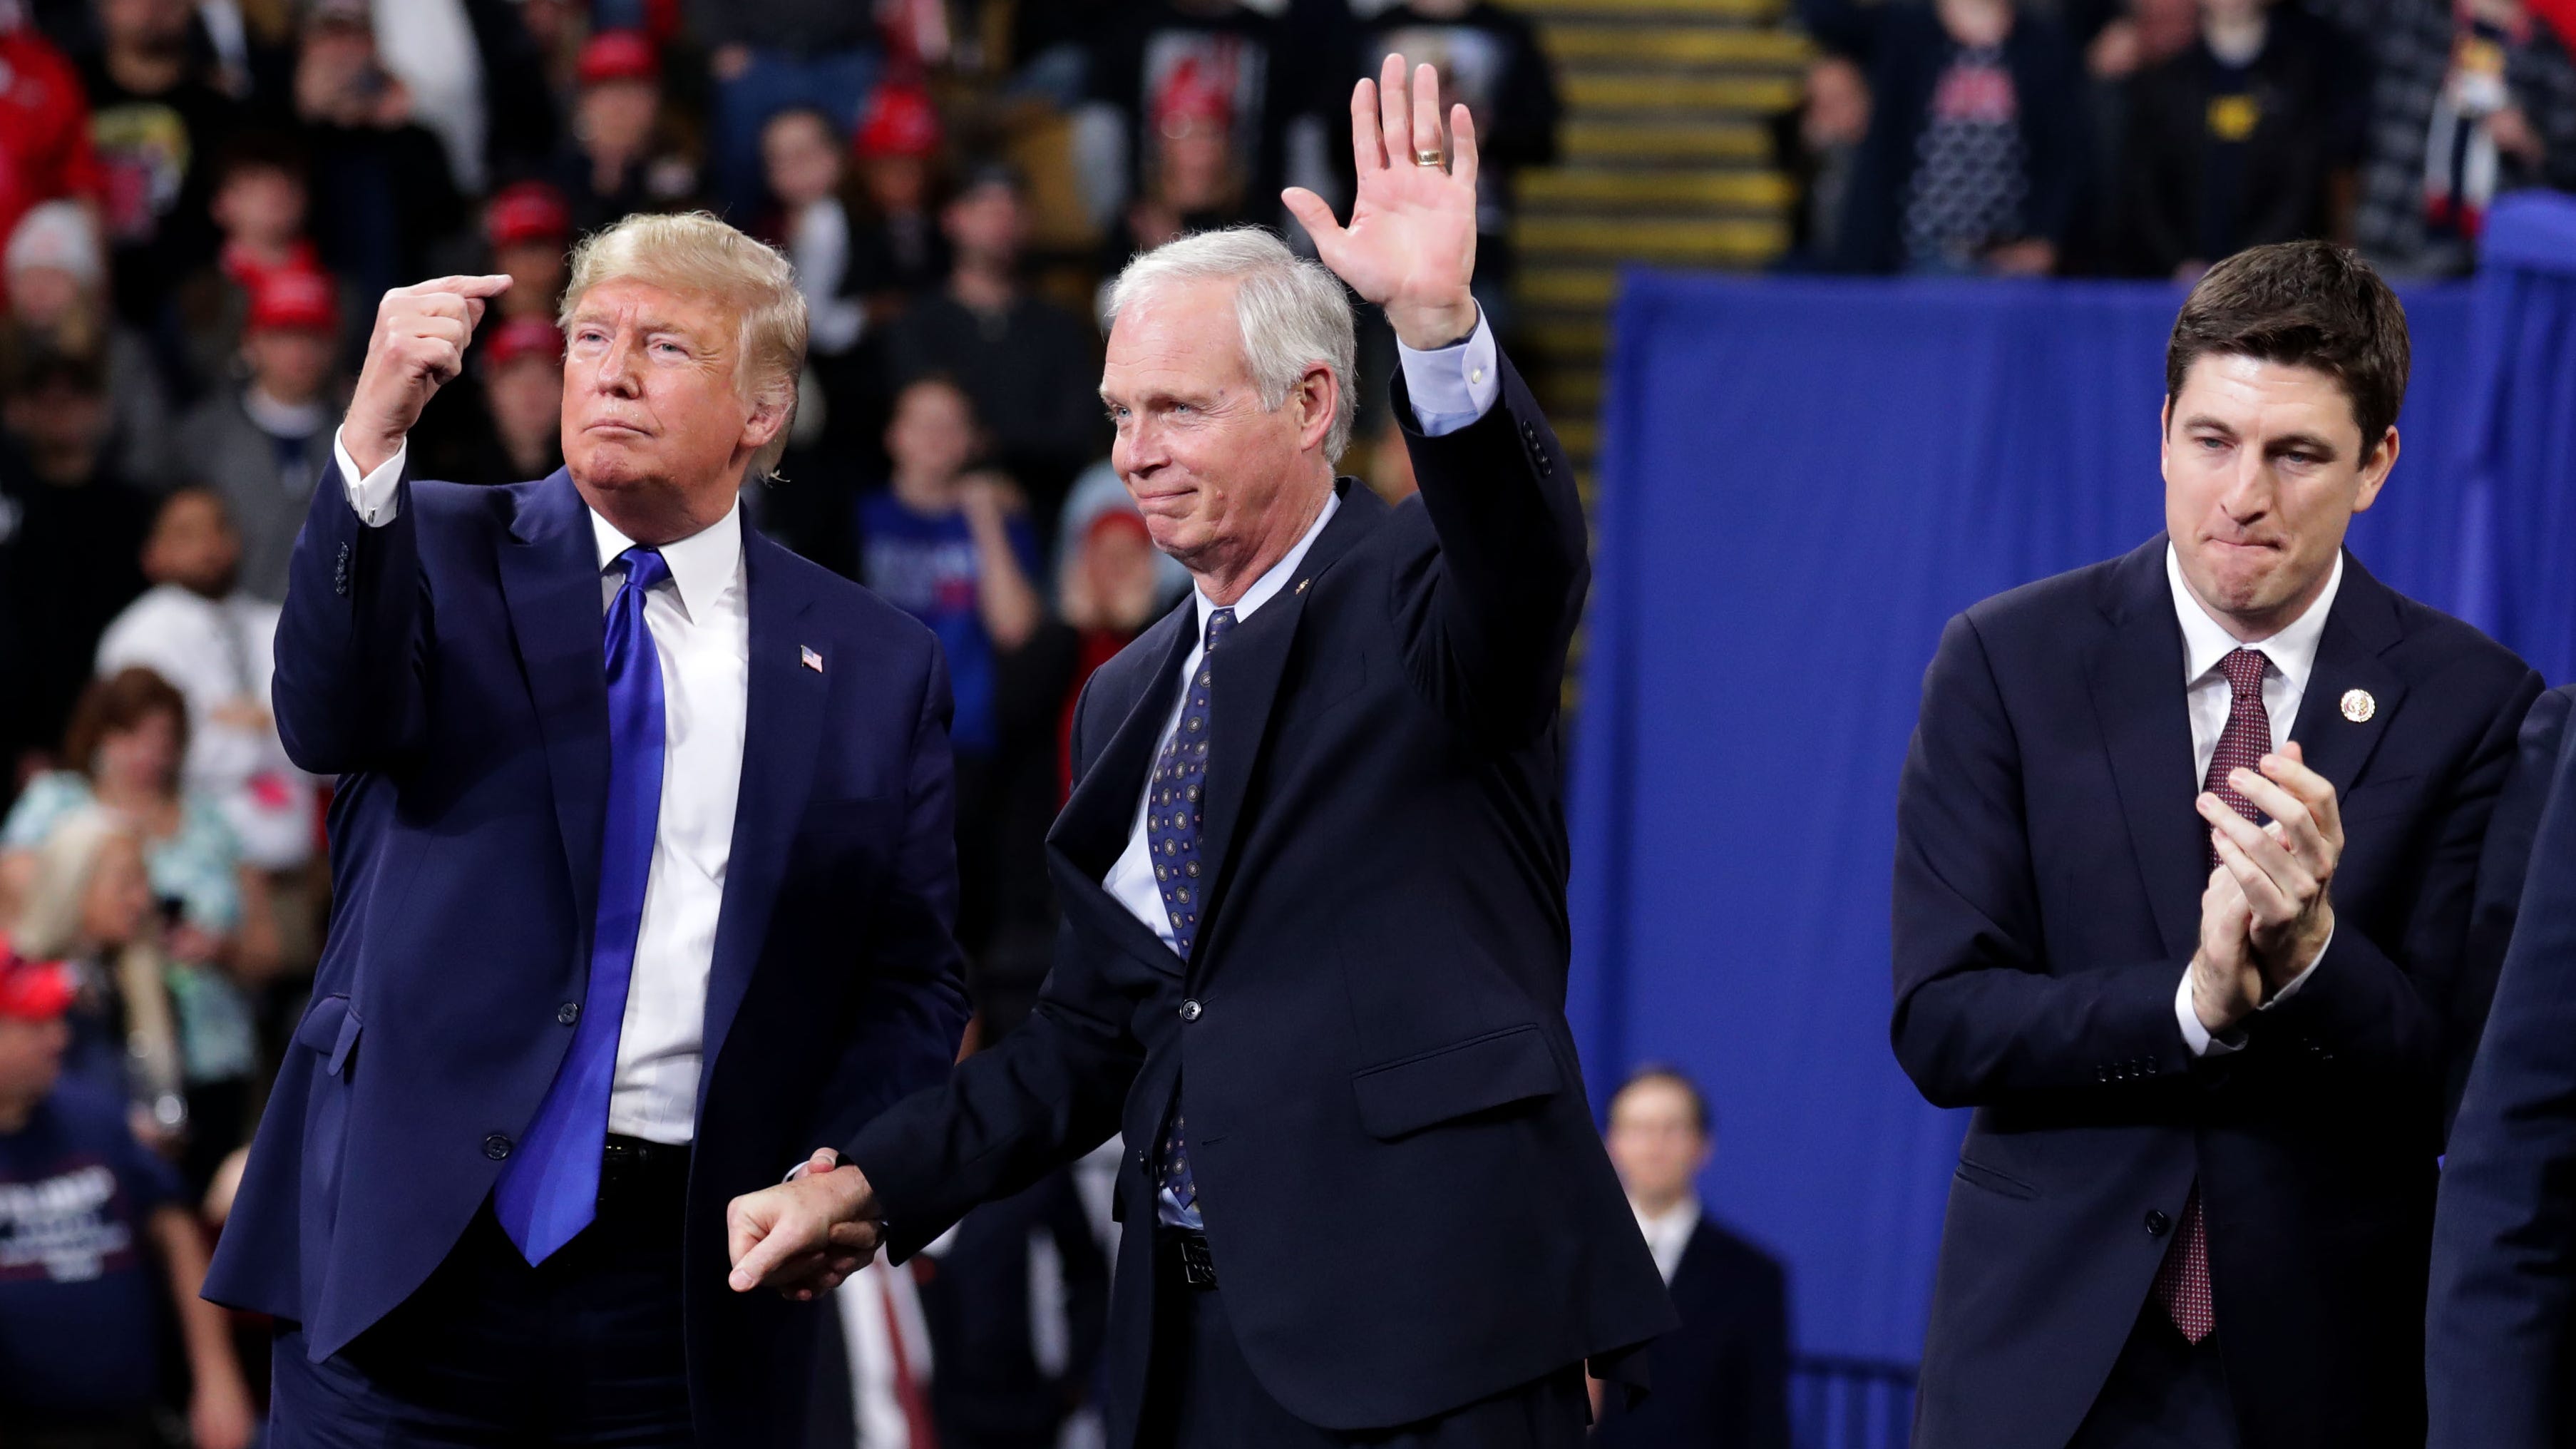 President Donald Trump invites Sen. Ron Johnson to speak after he was introduces at the UW-Milwaukee Panther Arena where the president held a campaign rally in Milwaukee on Tuesday, Jan. 14, 2020.